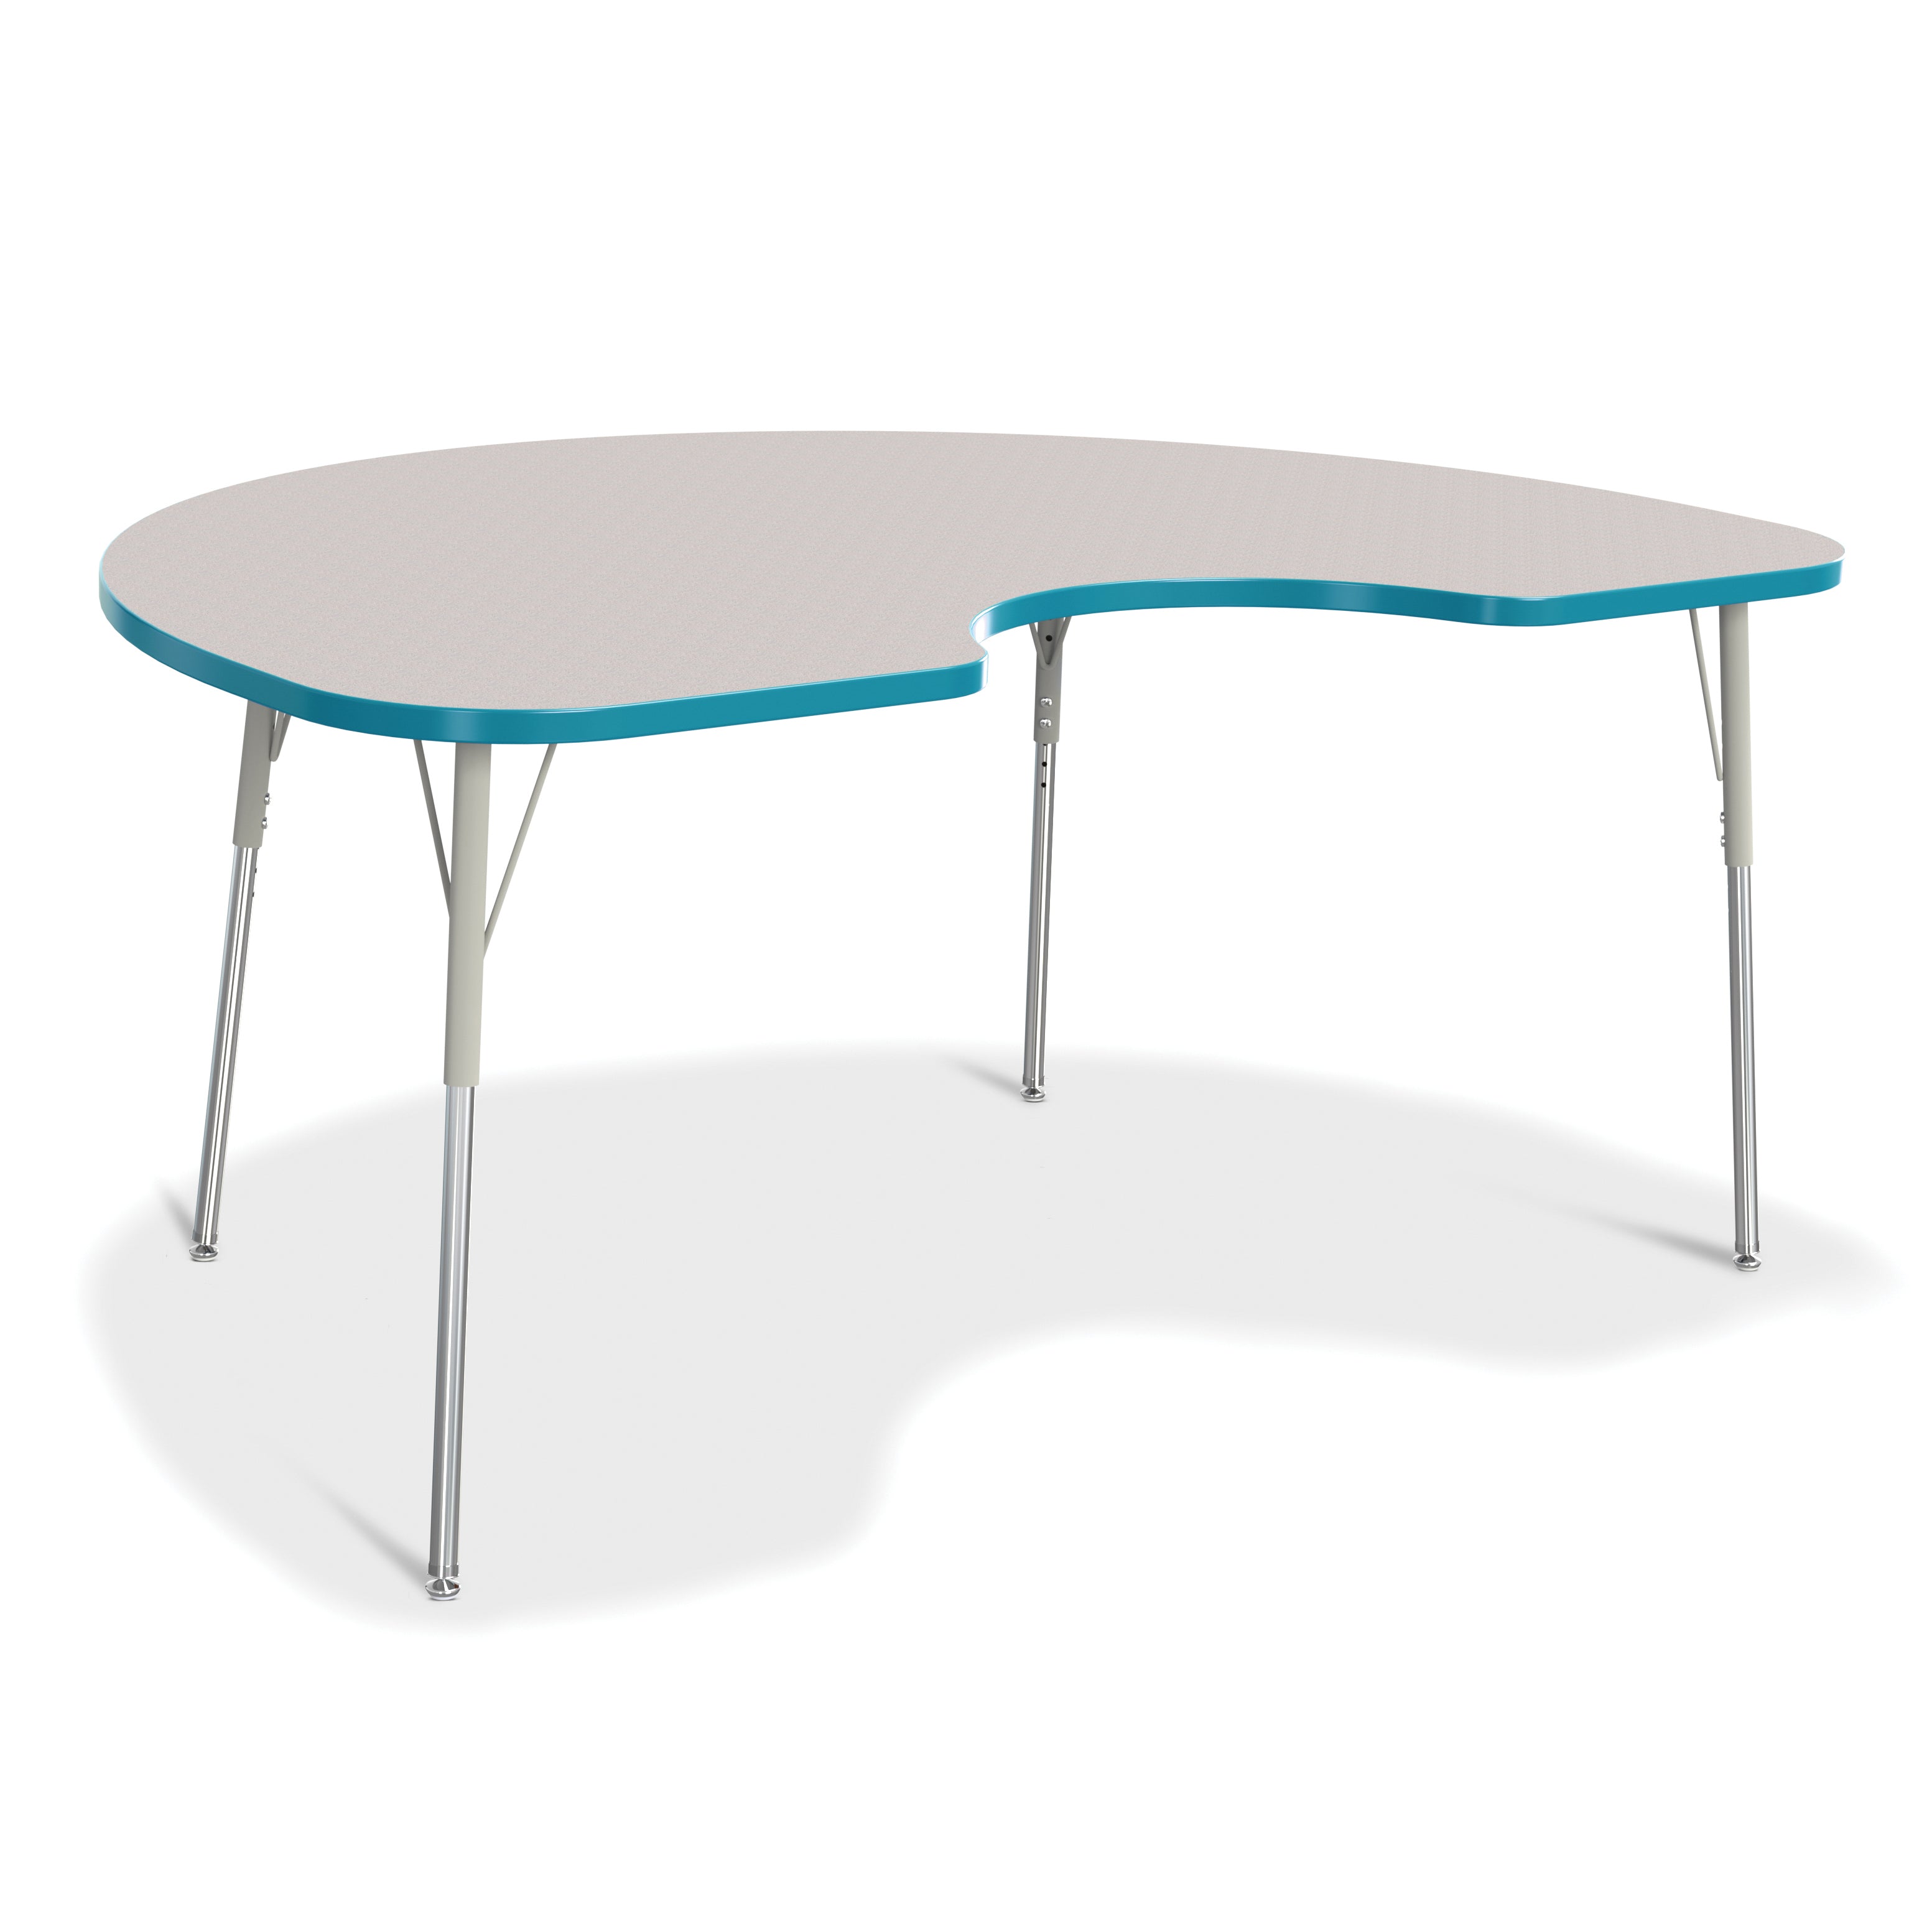 6423JCA005, Berries Kidney Activity Table - 48" X 72", A-height - Freckled Gray/Teal/Gray